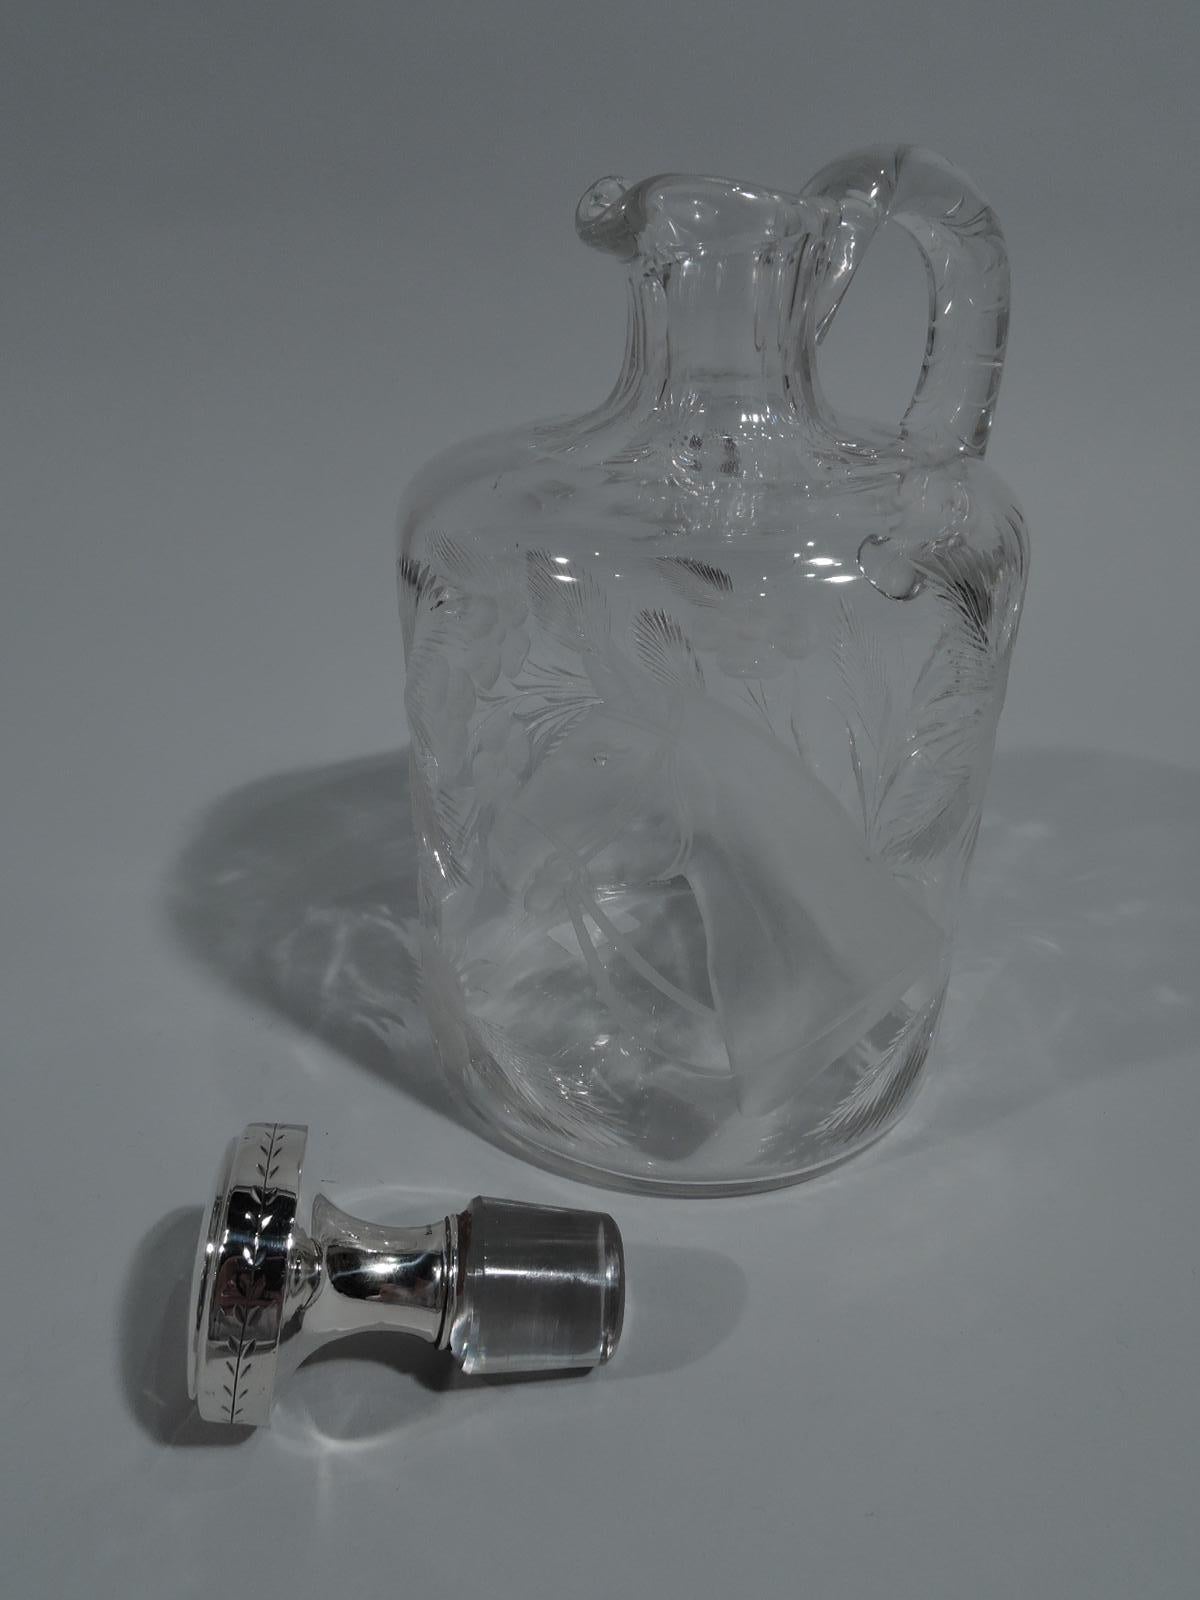 Edwardian glass and sterling silver decanter with horse motif. Made by TG Hawkes & Co. in Corning, New York, ca 1920. Drum form with curved shoulder, short faceted neck, and high-looping ring handle. Stopper sterling silver with flat top and spool